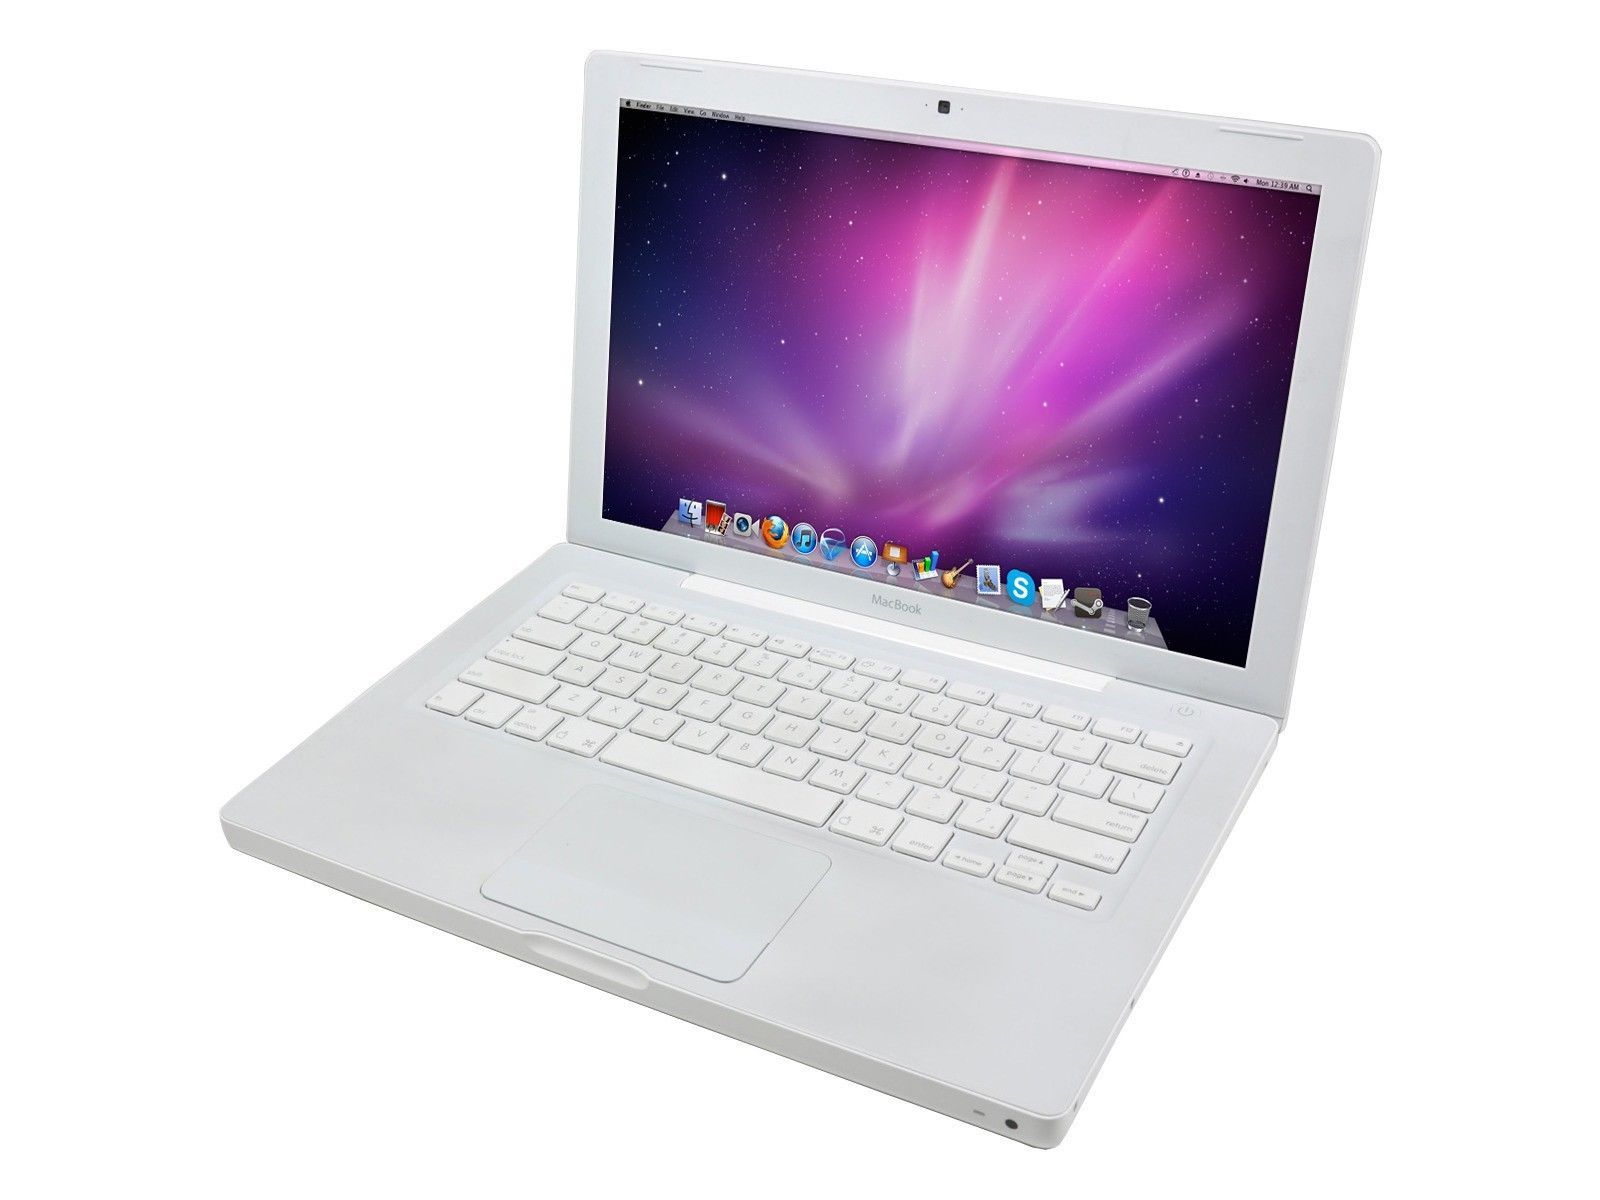 Apple MacBook Core 2 Duo White Computer 2.0 GHz 13" Read Before Purchasing! - $199.95